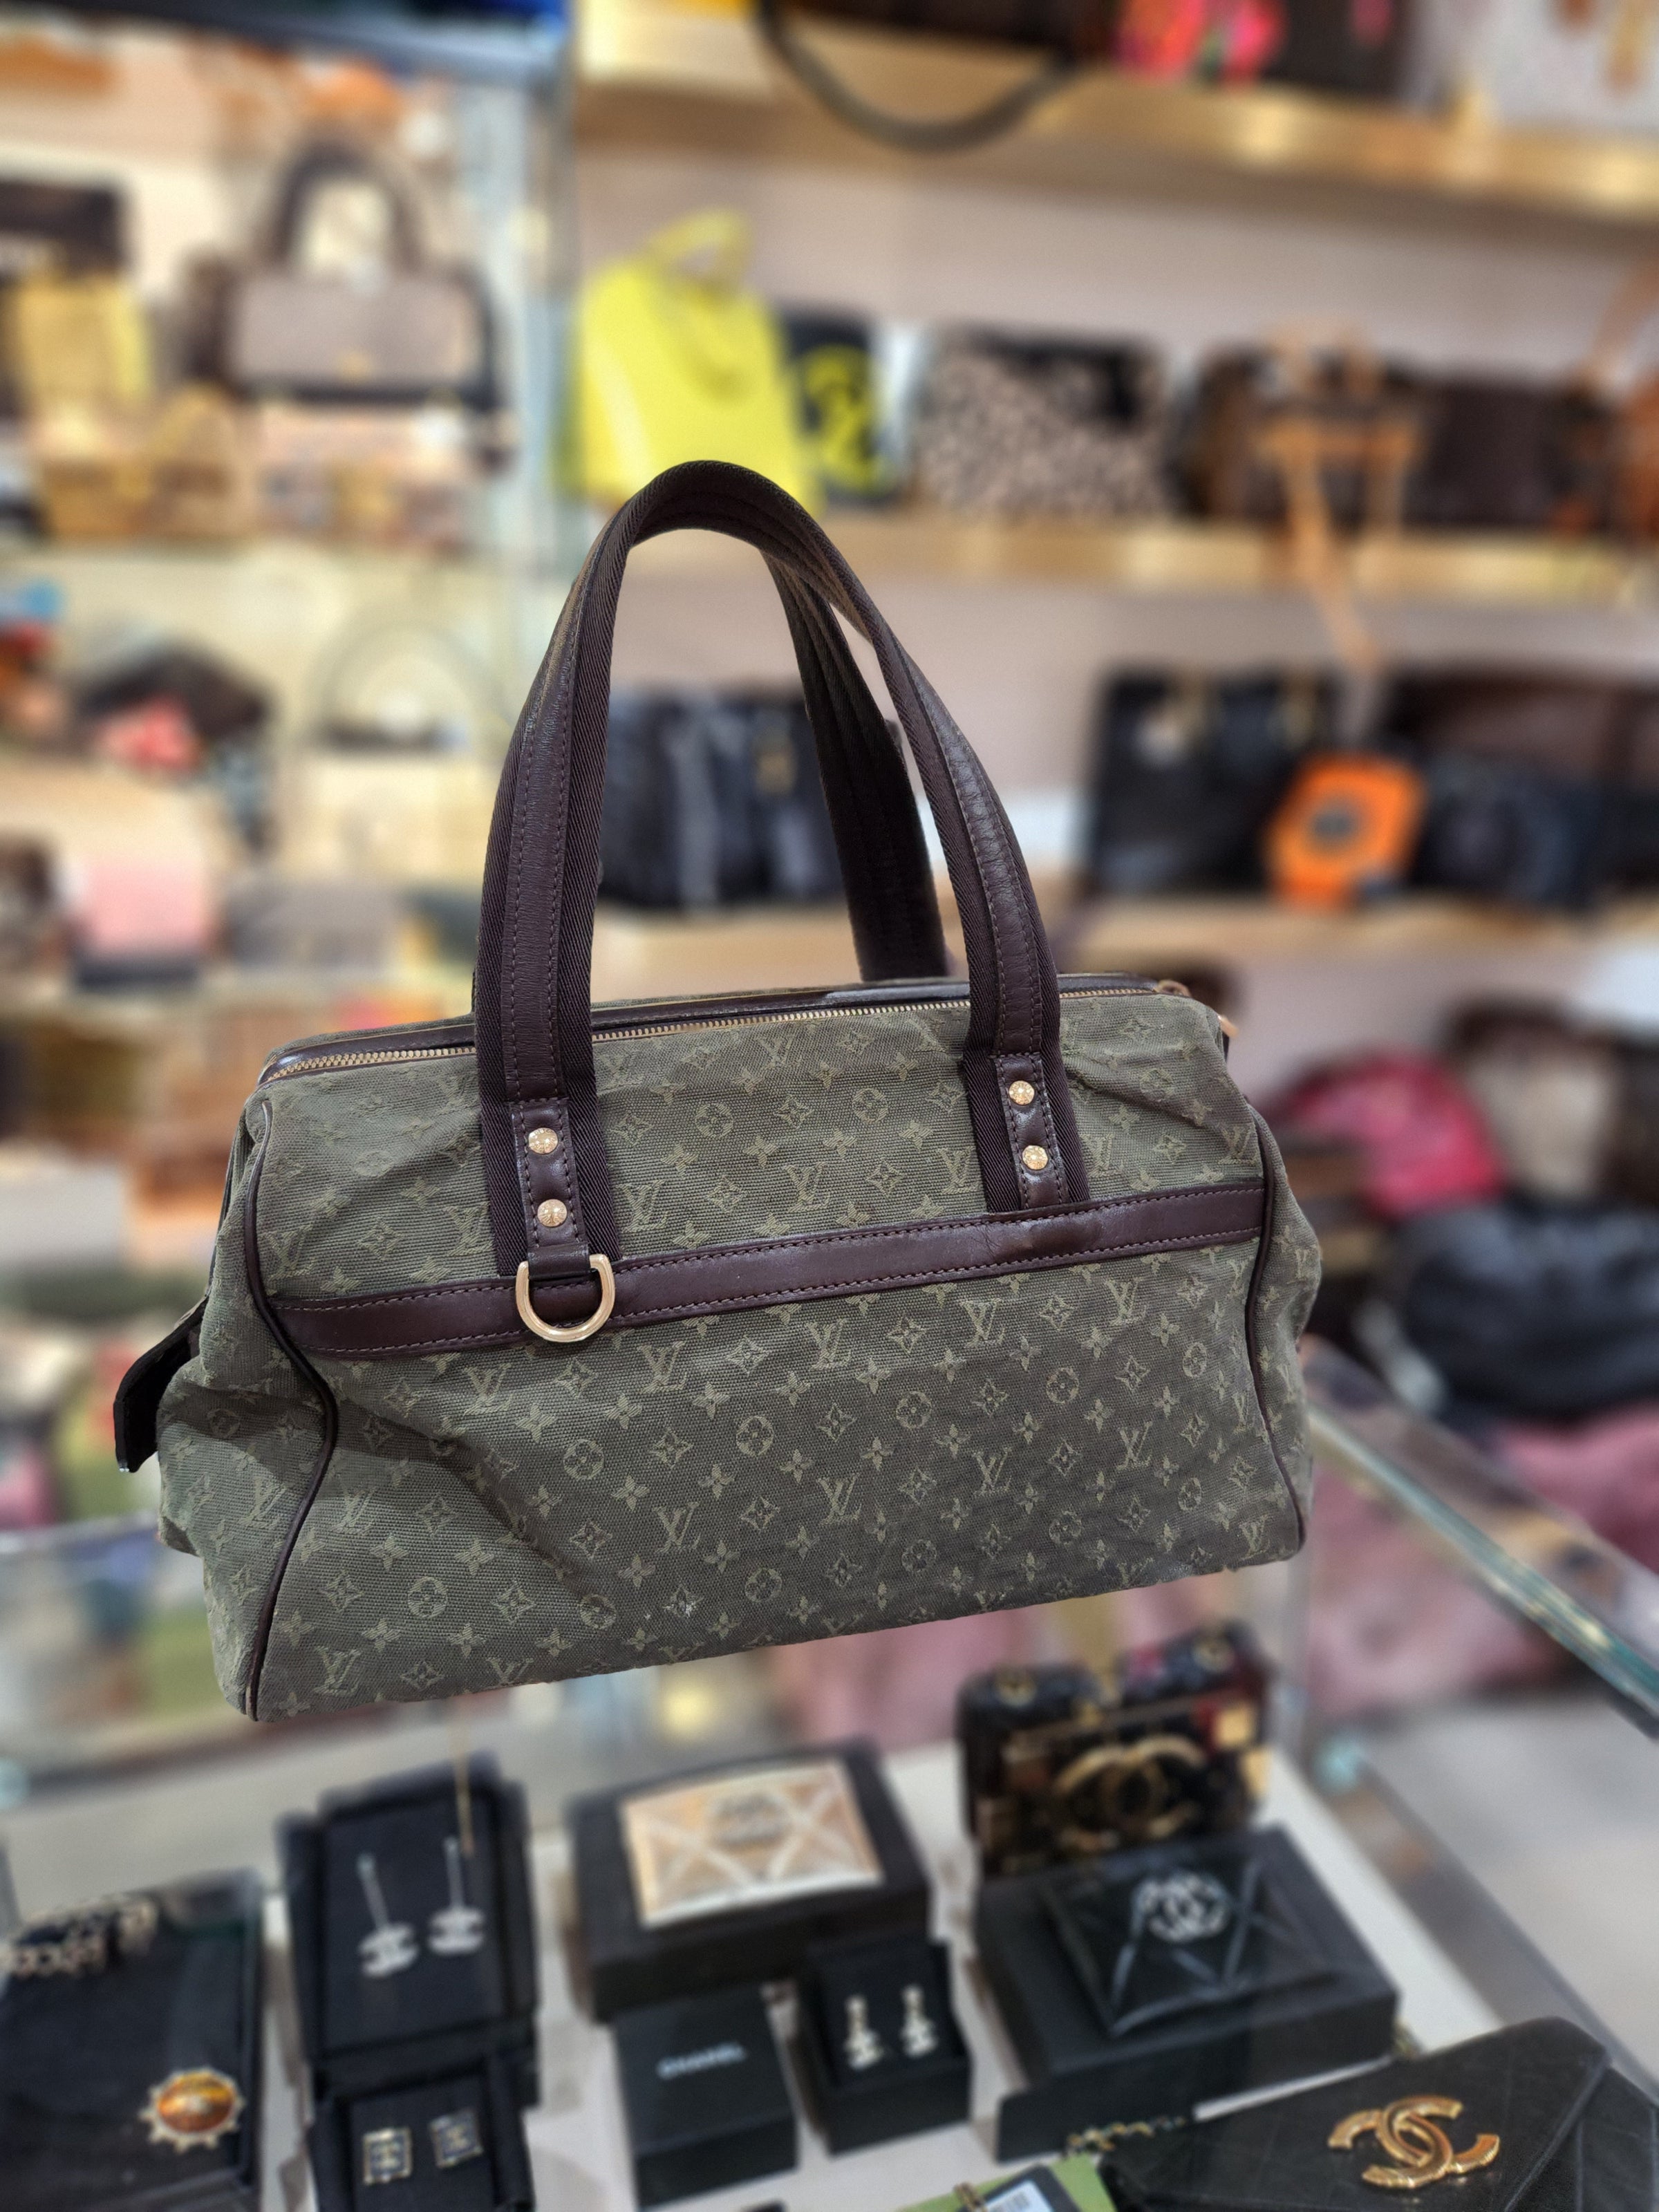 Name Droppers - Walk into 2021 in LV . . . . . Louis Vuitton bag $799  #namedroppers #slc #slcstyle #summerstyle #saltlakecityutah #designer  #designerconsignment #summer #luxuryfinds #secondhand #secondhandslc  #fashionlover #fashion #sugarhouse